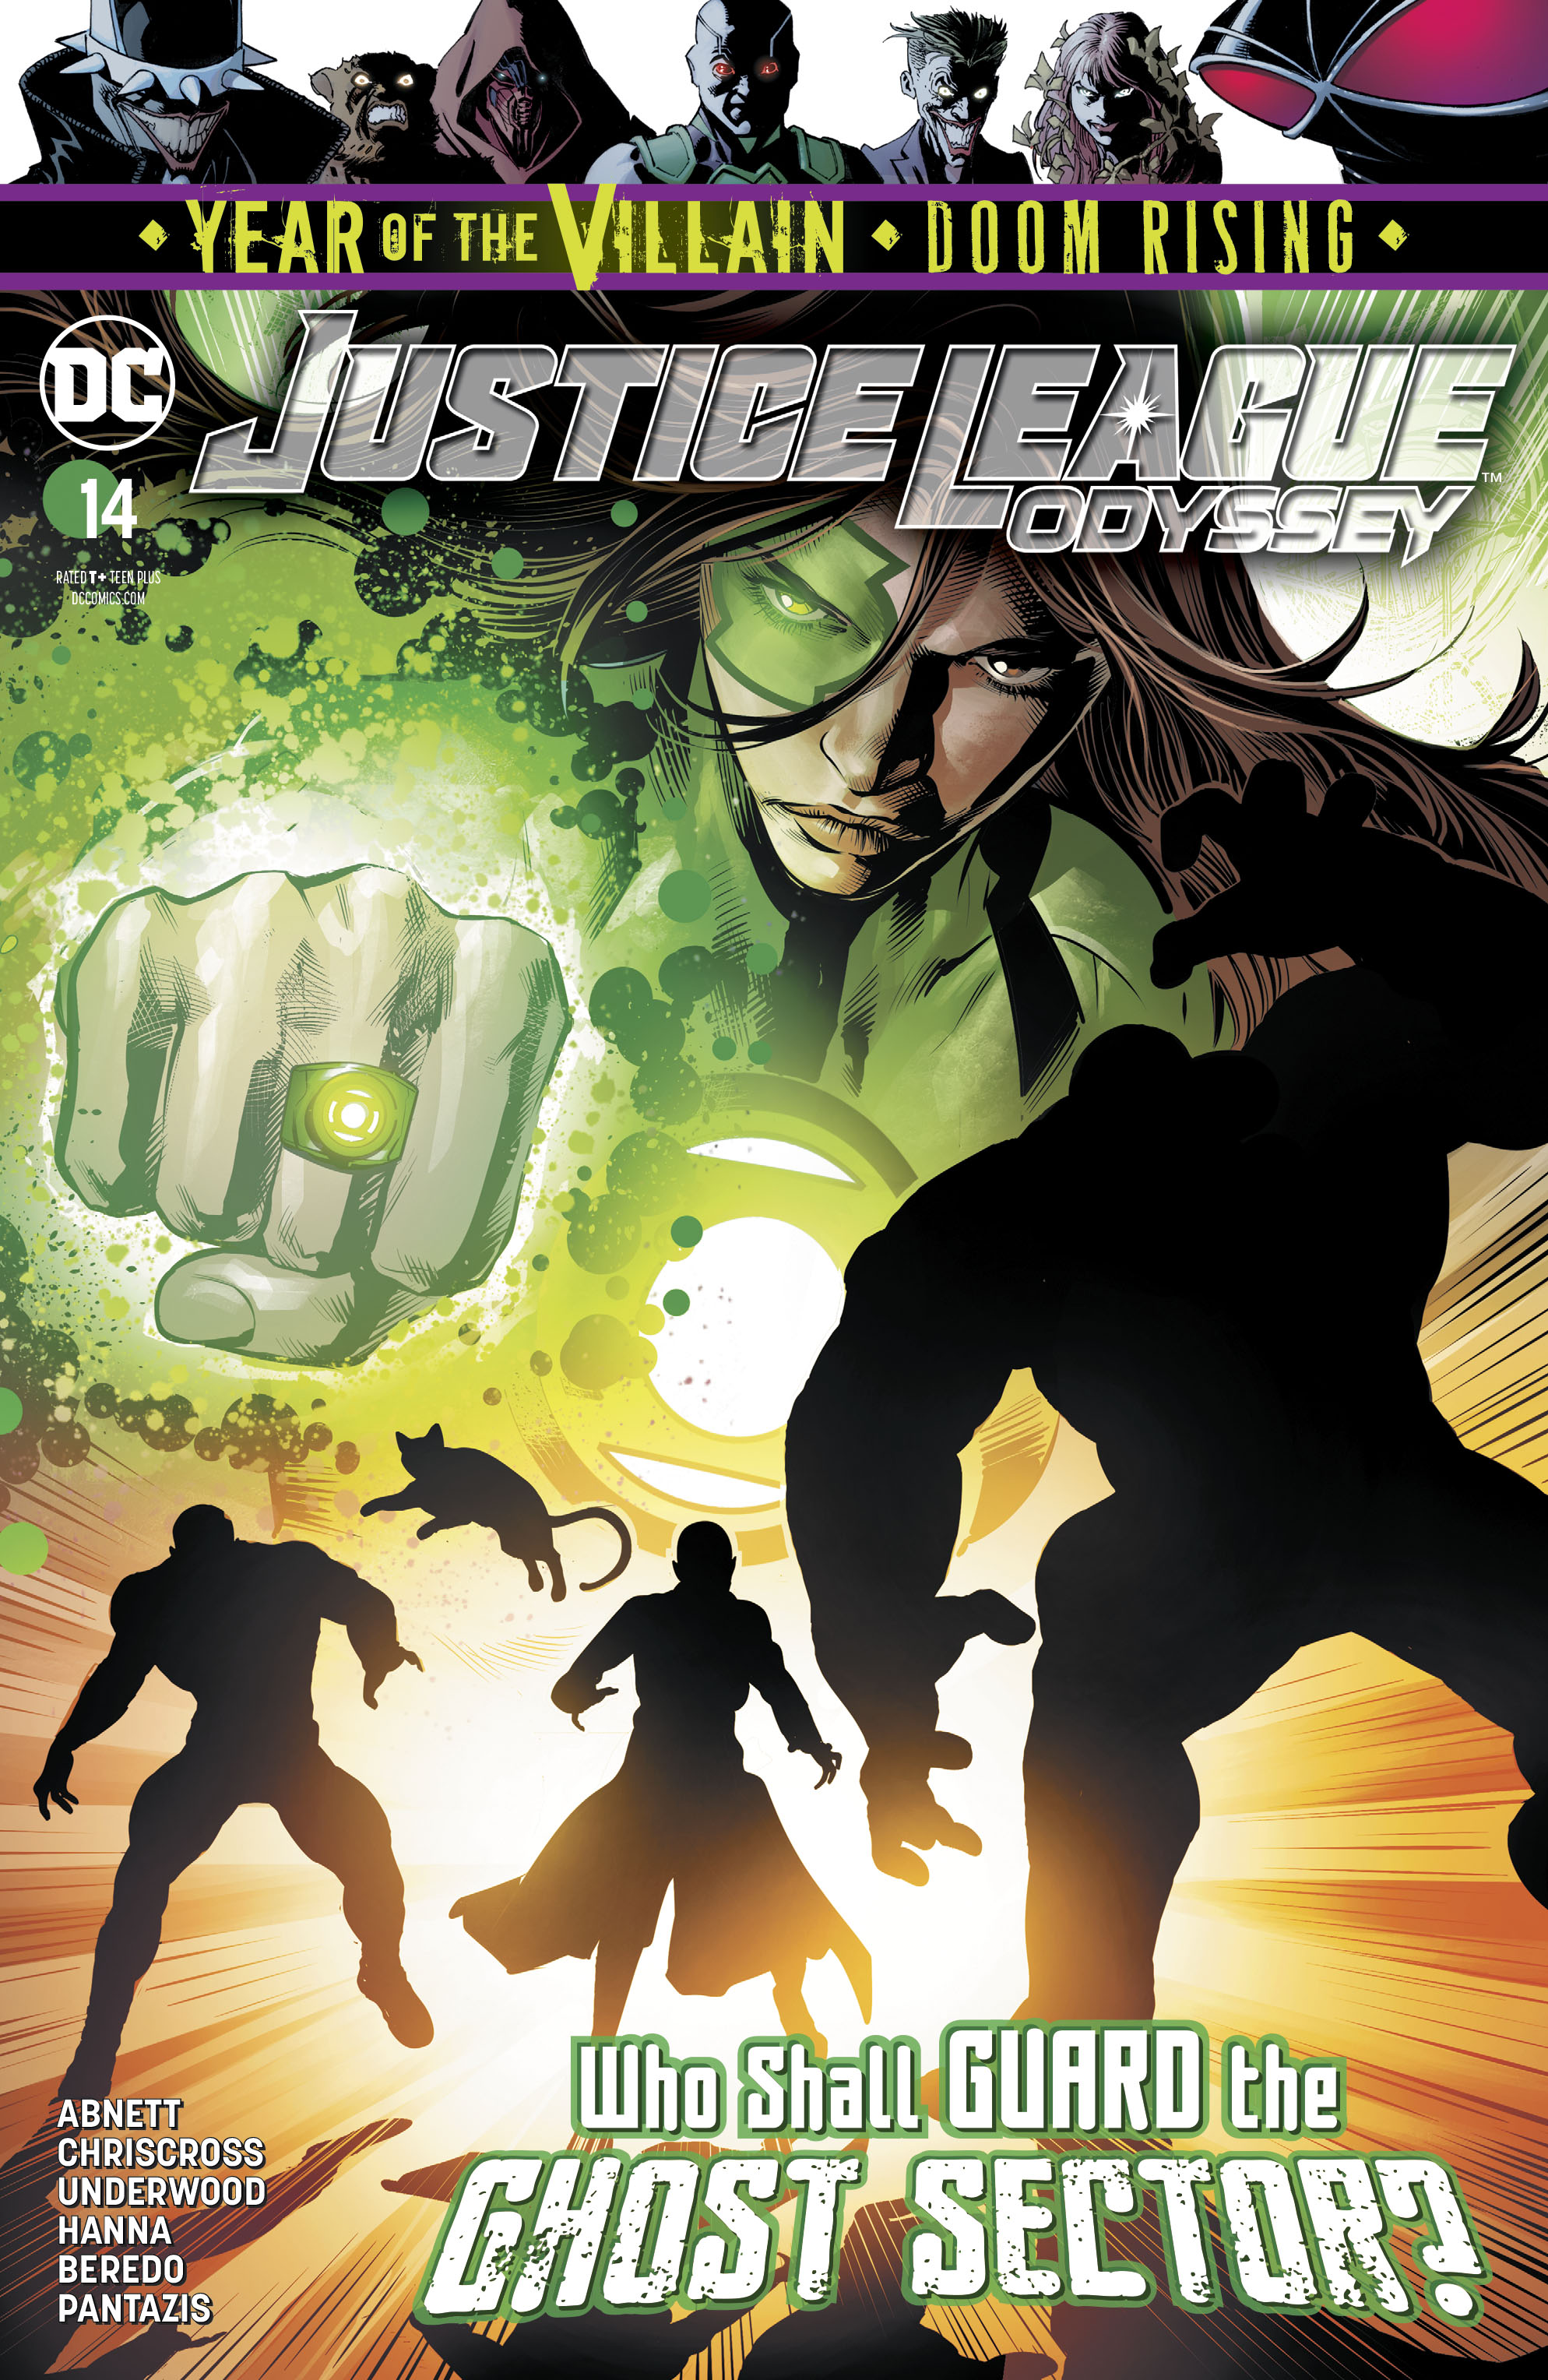 Read online Justice League Odyssey comic -  Issue #14 - 1